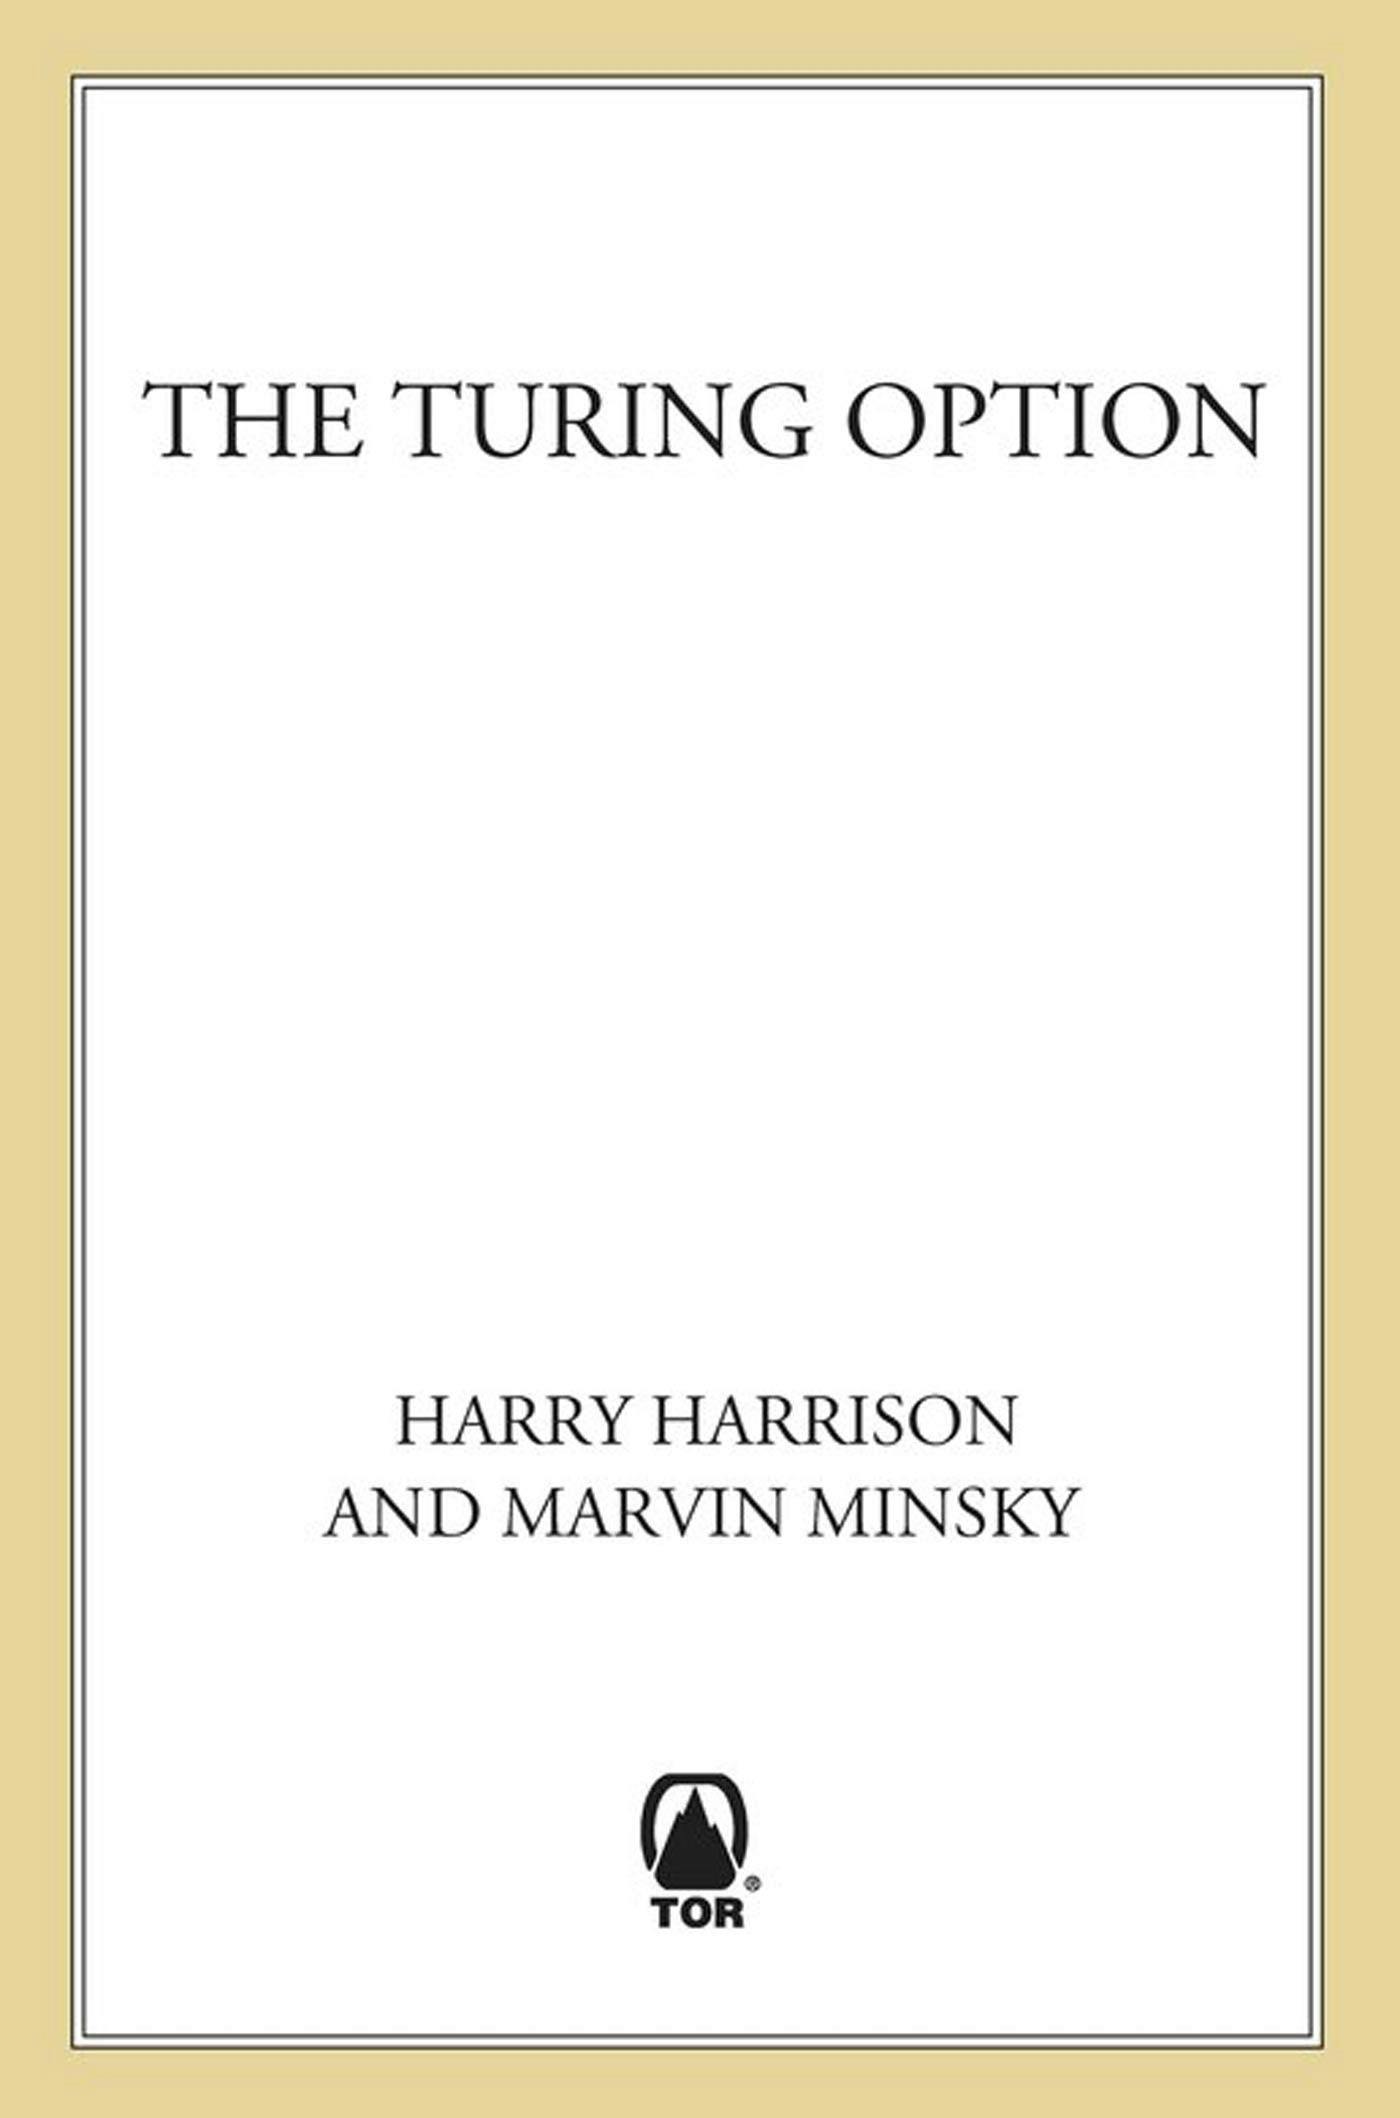 Cover for the book titled as: The Turing Option